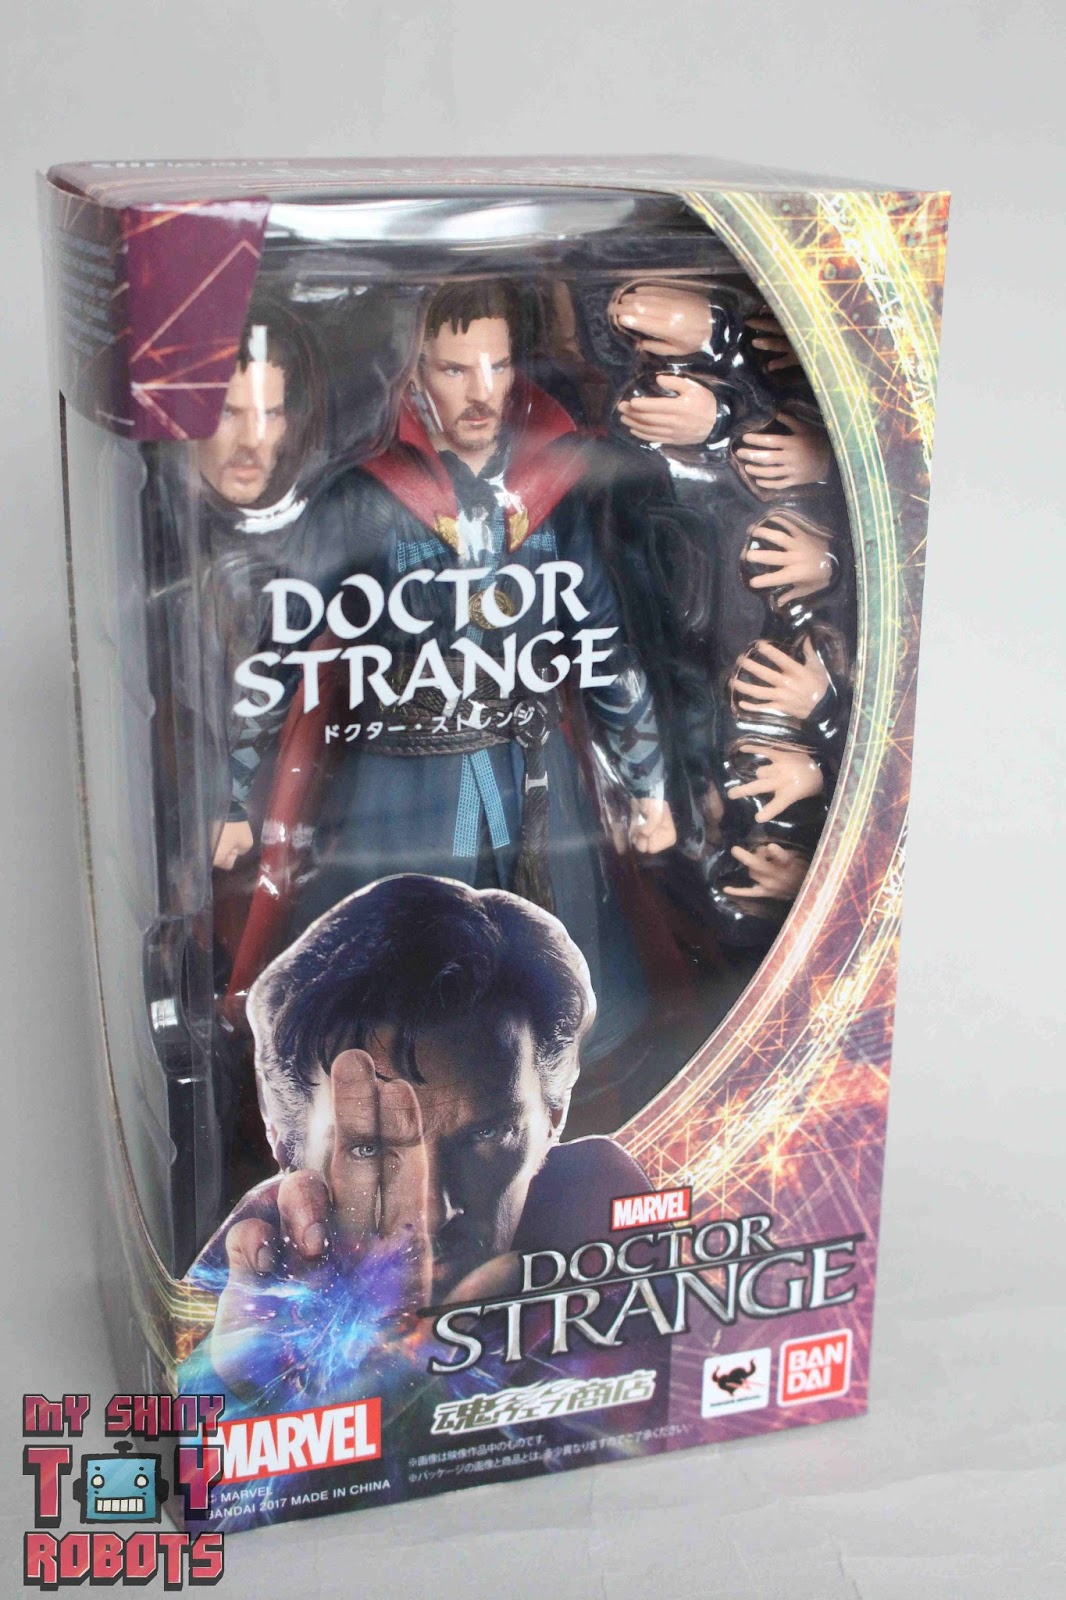 My Shiny Toy Robots: Toybox REVIEW: S.H. Figuarts Doctor Strange